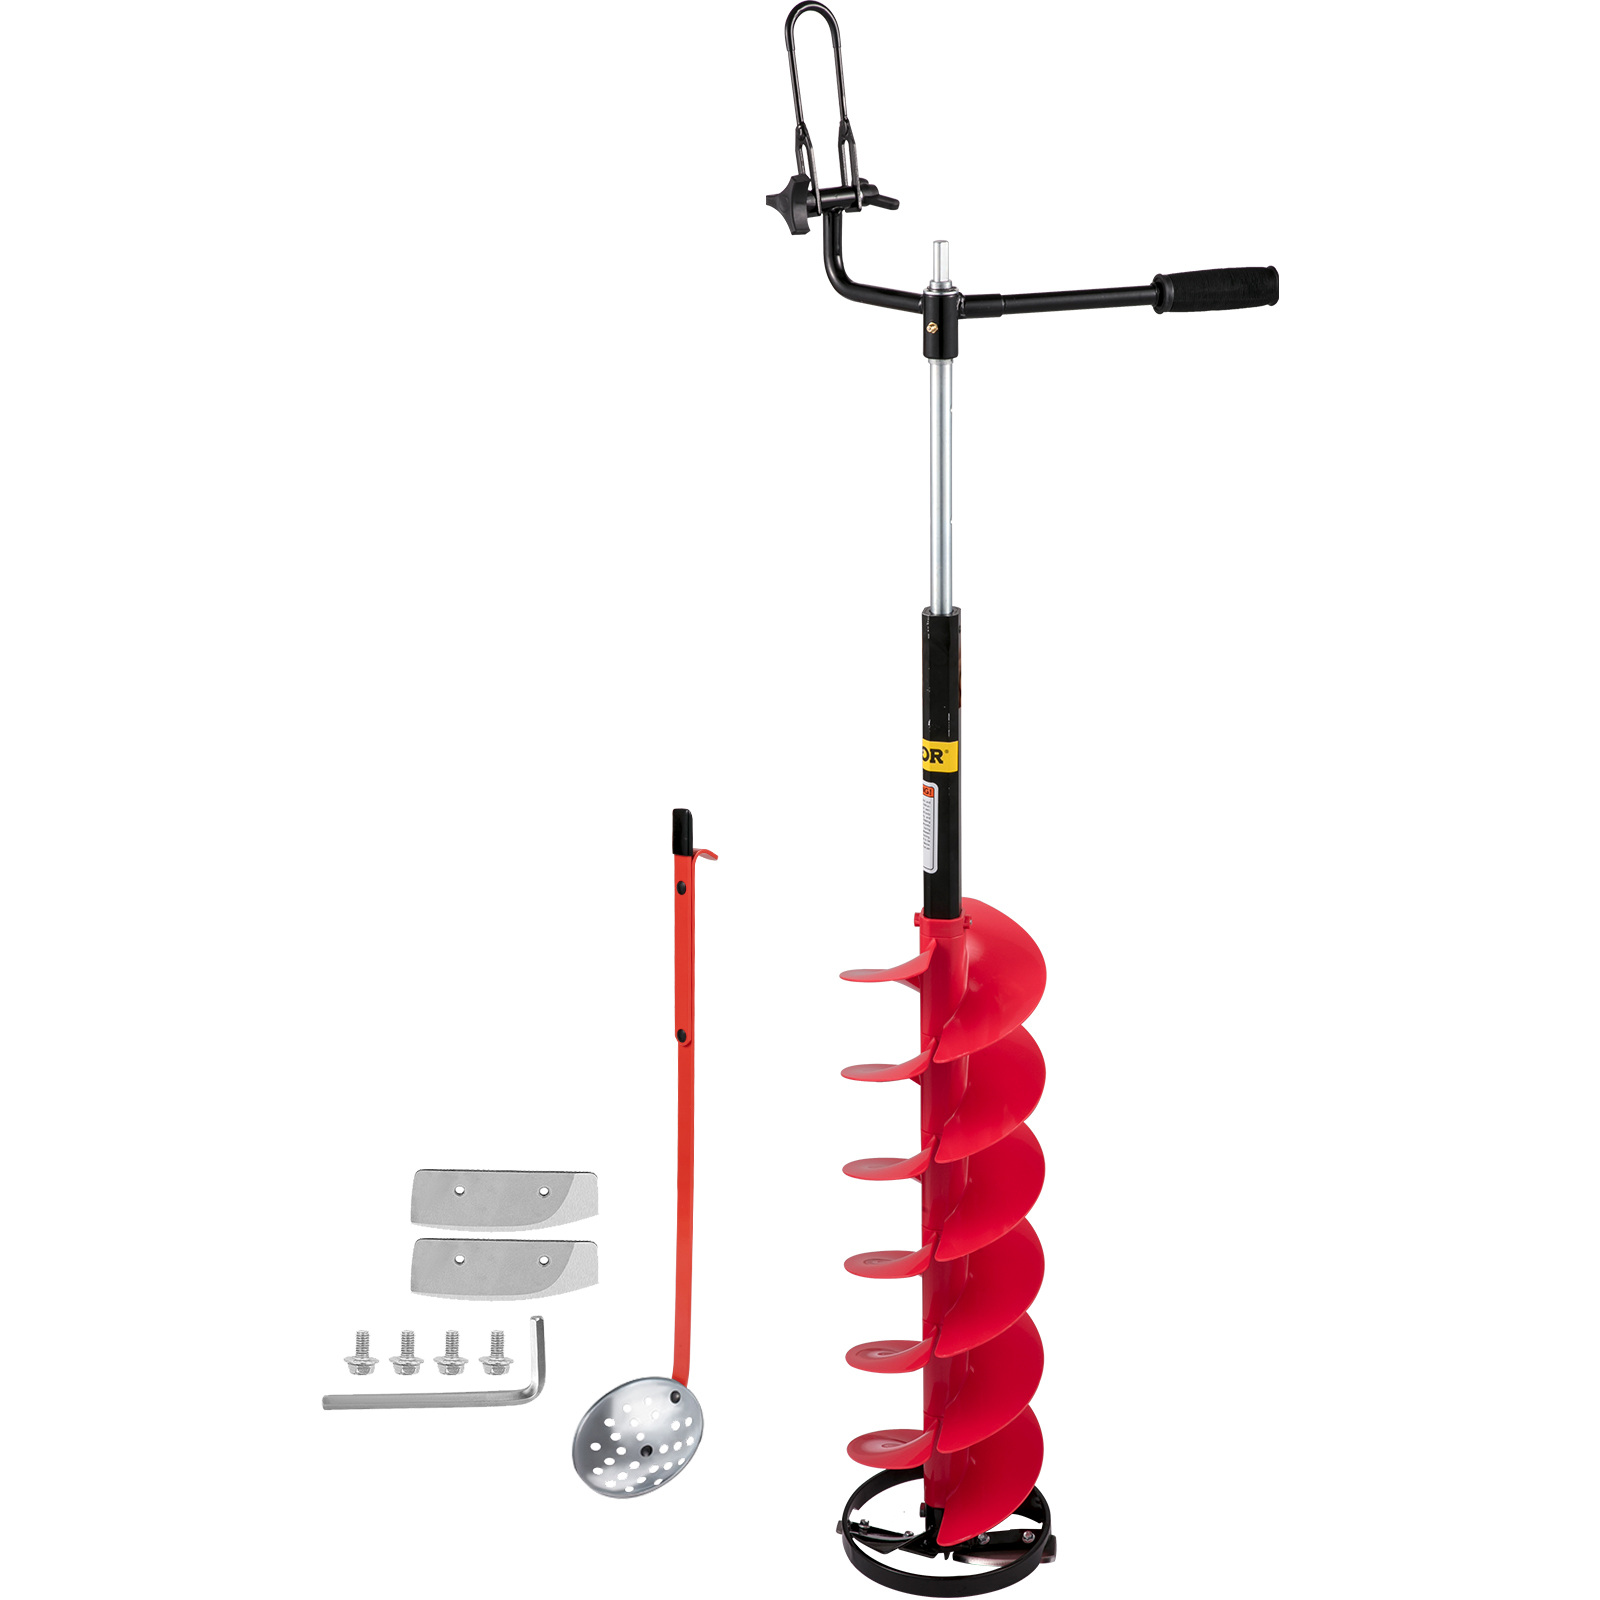  DEERFAMY Ice Fishing Auger, 8 Inch Diameter Nylon Ice Auger,  45 Inch Long Cordless Ice Augers for Ice Fishing, Auger Drill with 14 Inch  Extension, Top Plate, Ice Scoop, Gloves